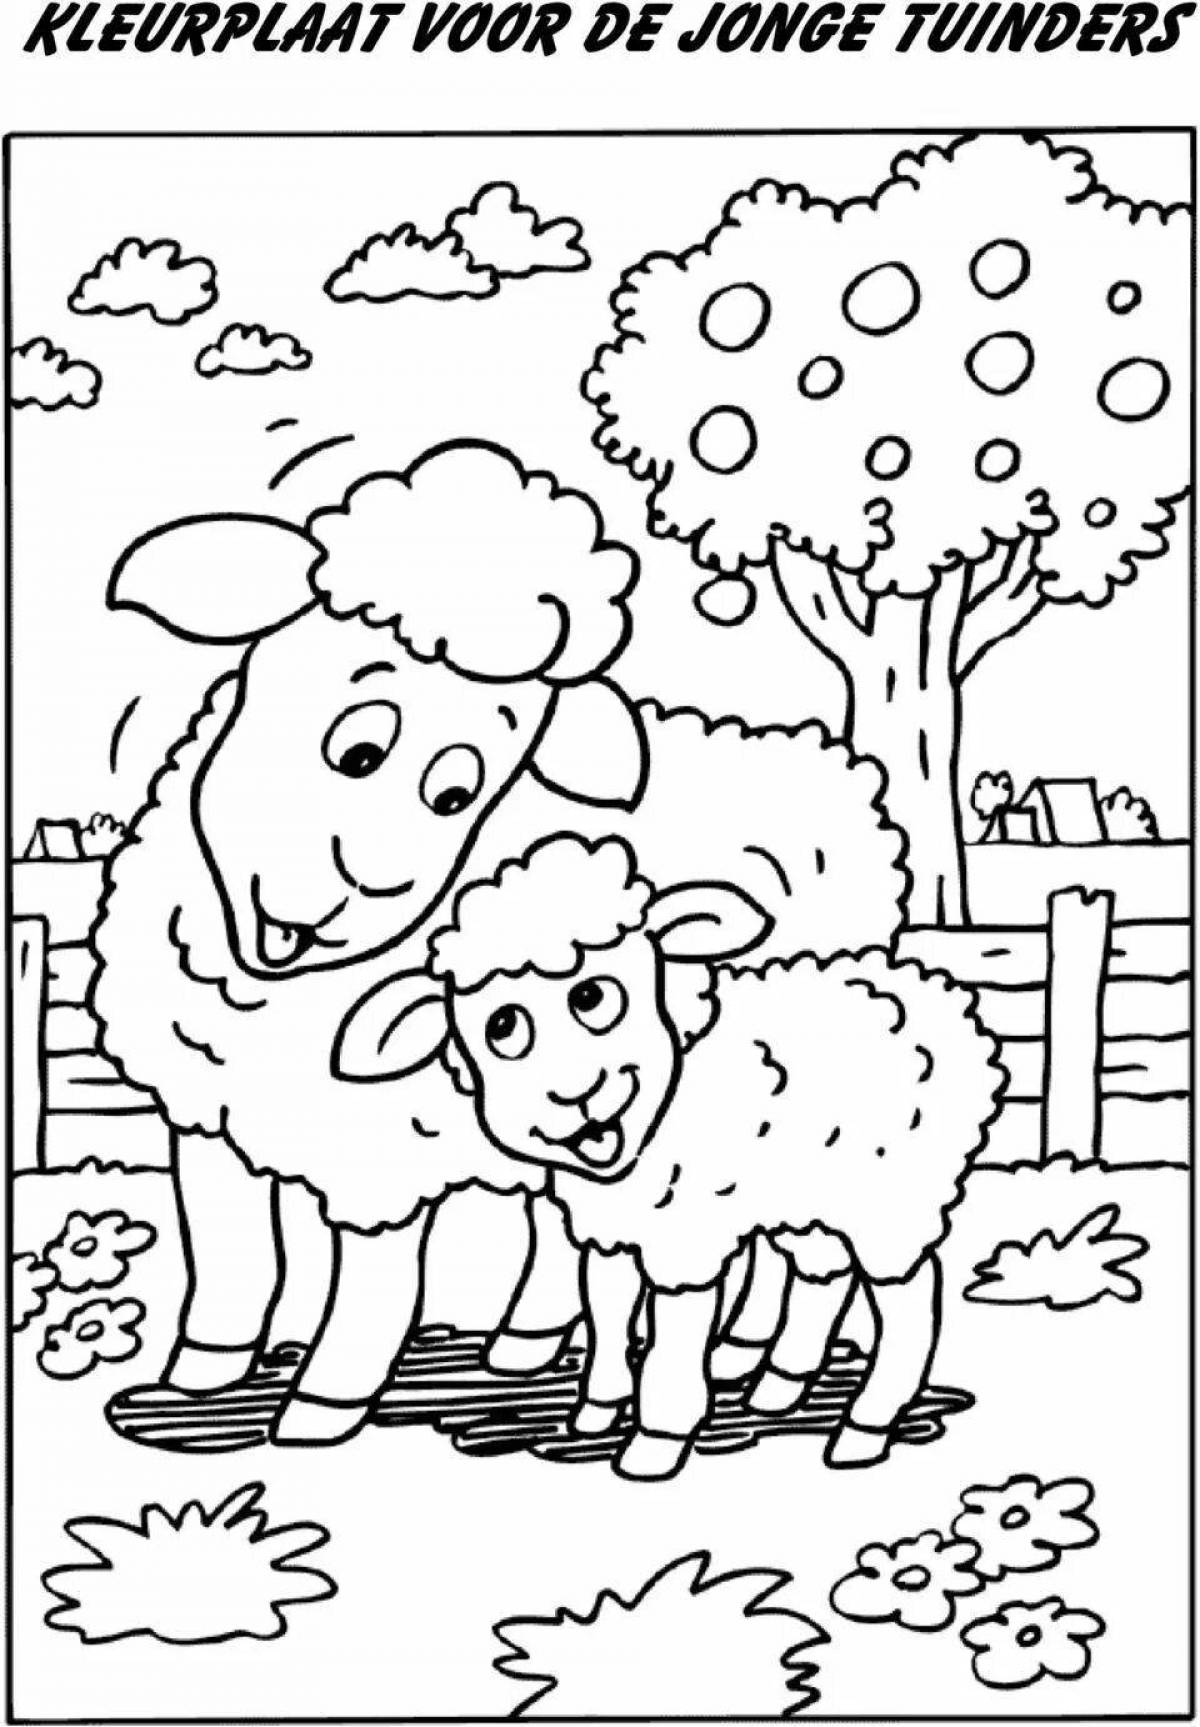 Shiny sheep coloring book for 5-6 year olds